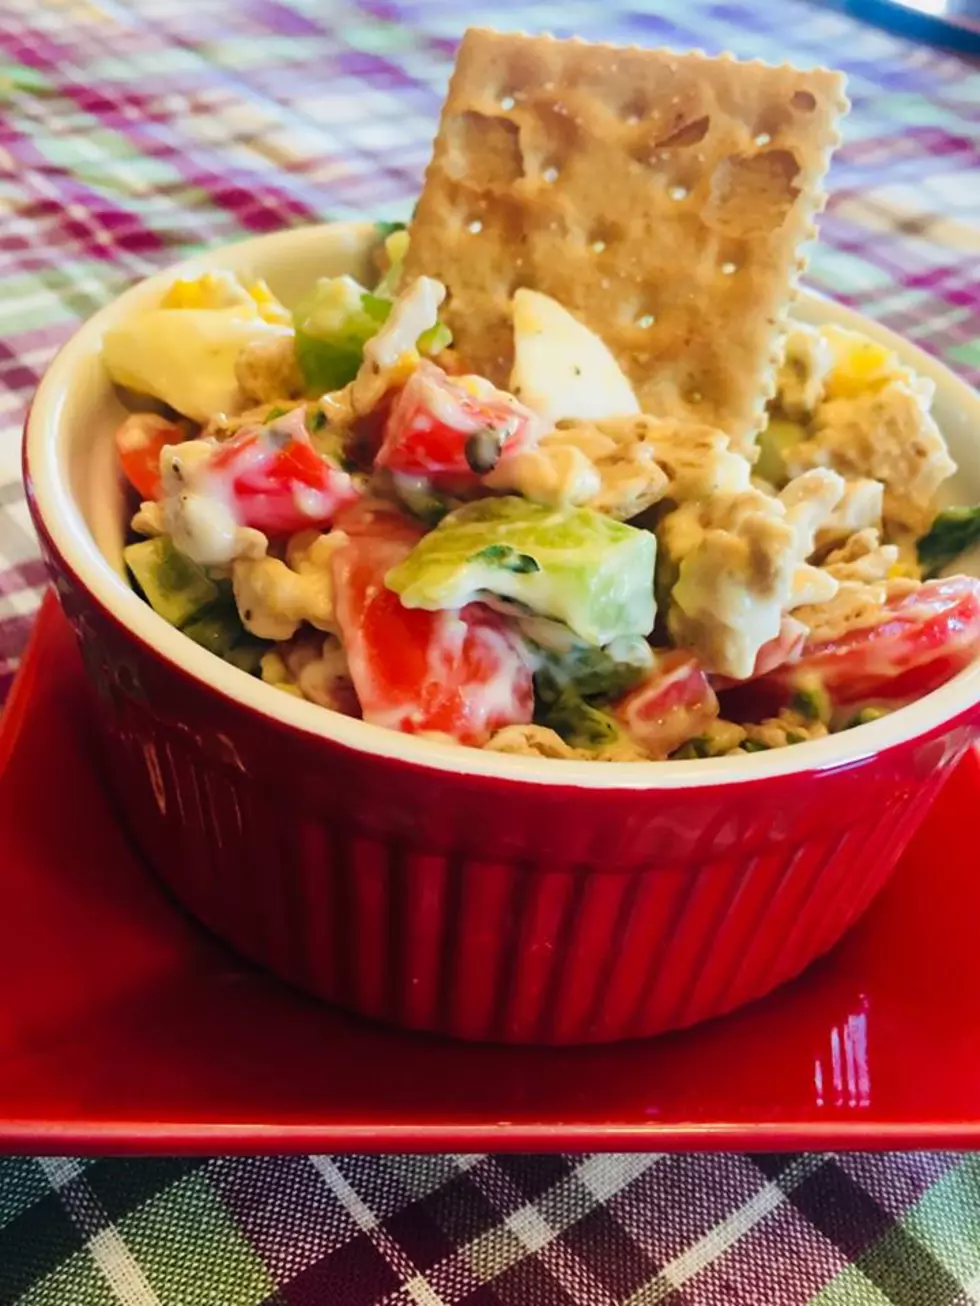 What’s Cookin’? Patty’s Cracker Salad [RECIPE]